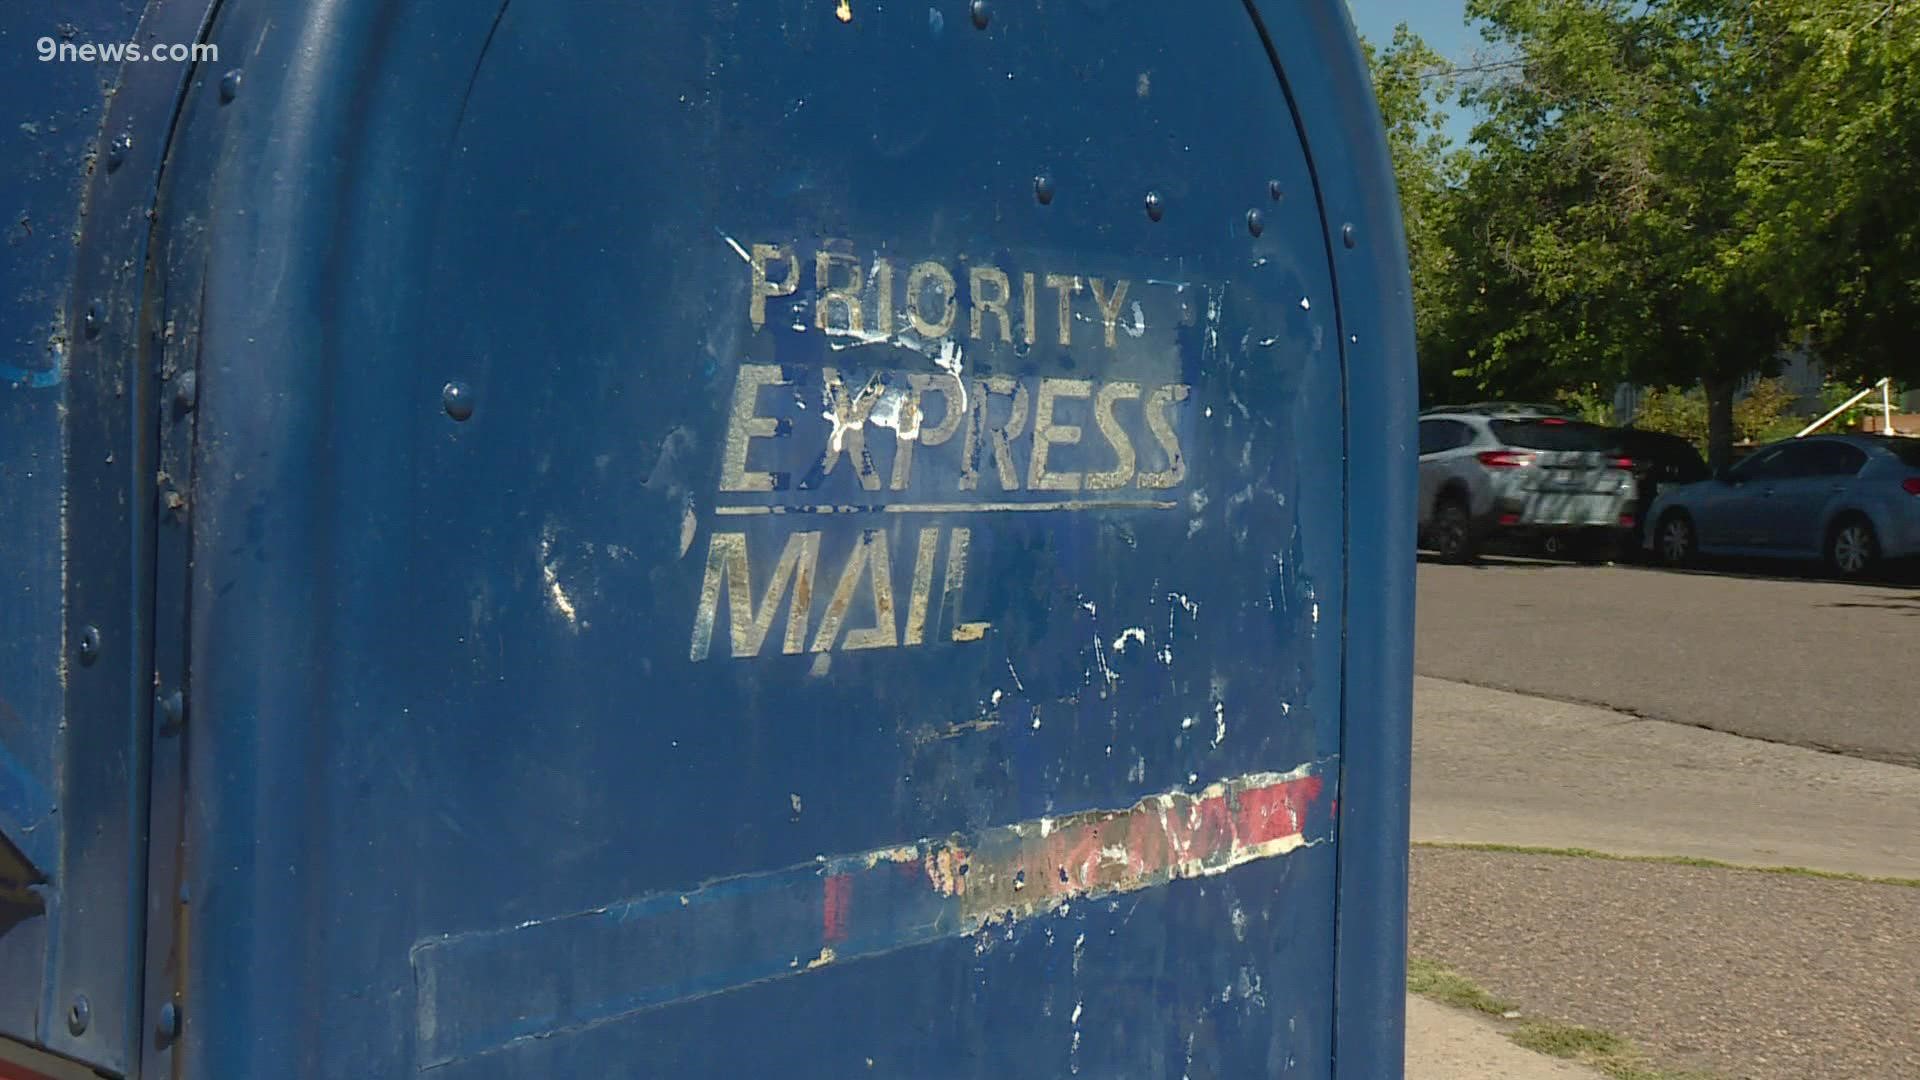 The U.S. Postal Service said that 61% of first-class mail would remain at its current standard, but long-distance mail deliveries will be slower.